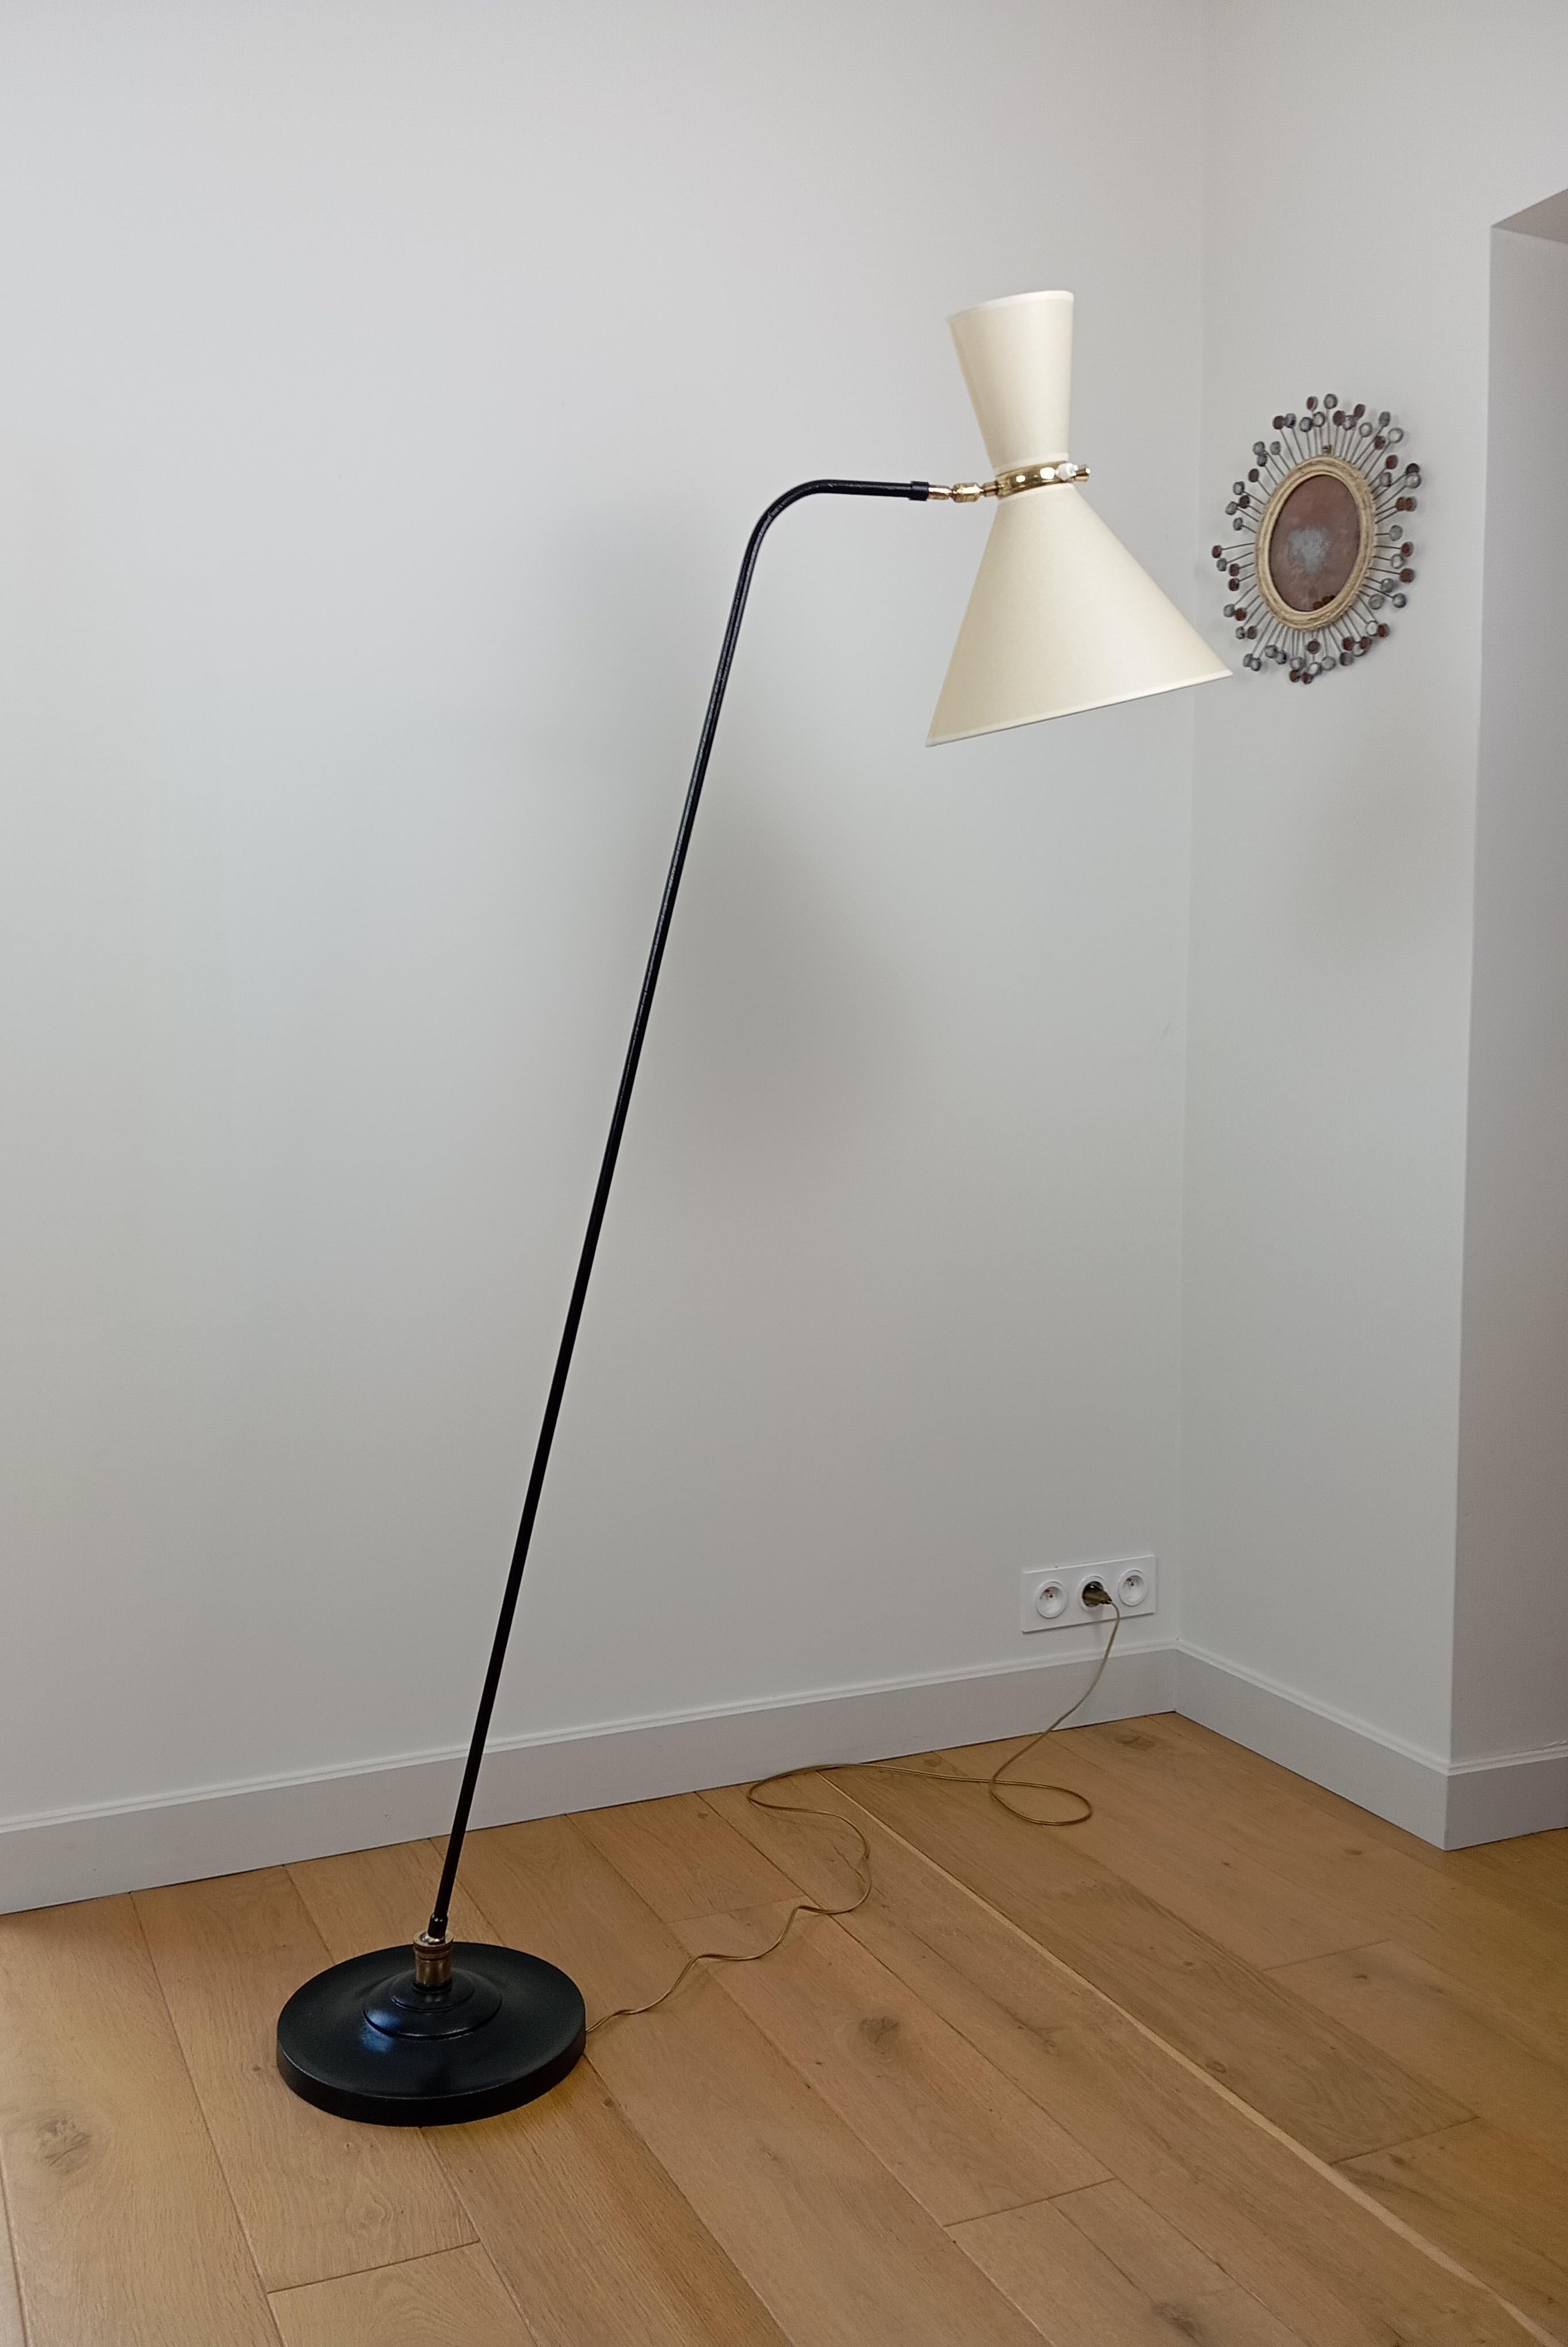 Floor lamp in black lacquered metal, cast iron and brass.
Composed of a circular cast-iron base, on which a black-lacquered metal light arm articulated by a brass ball joint is arranged.
A circular brass base articulated by a ball-and-socket joint